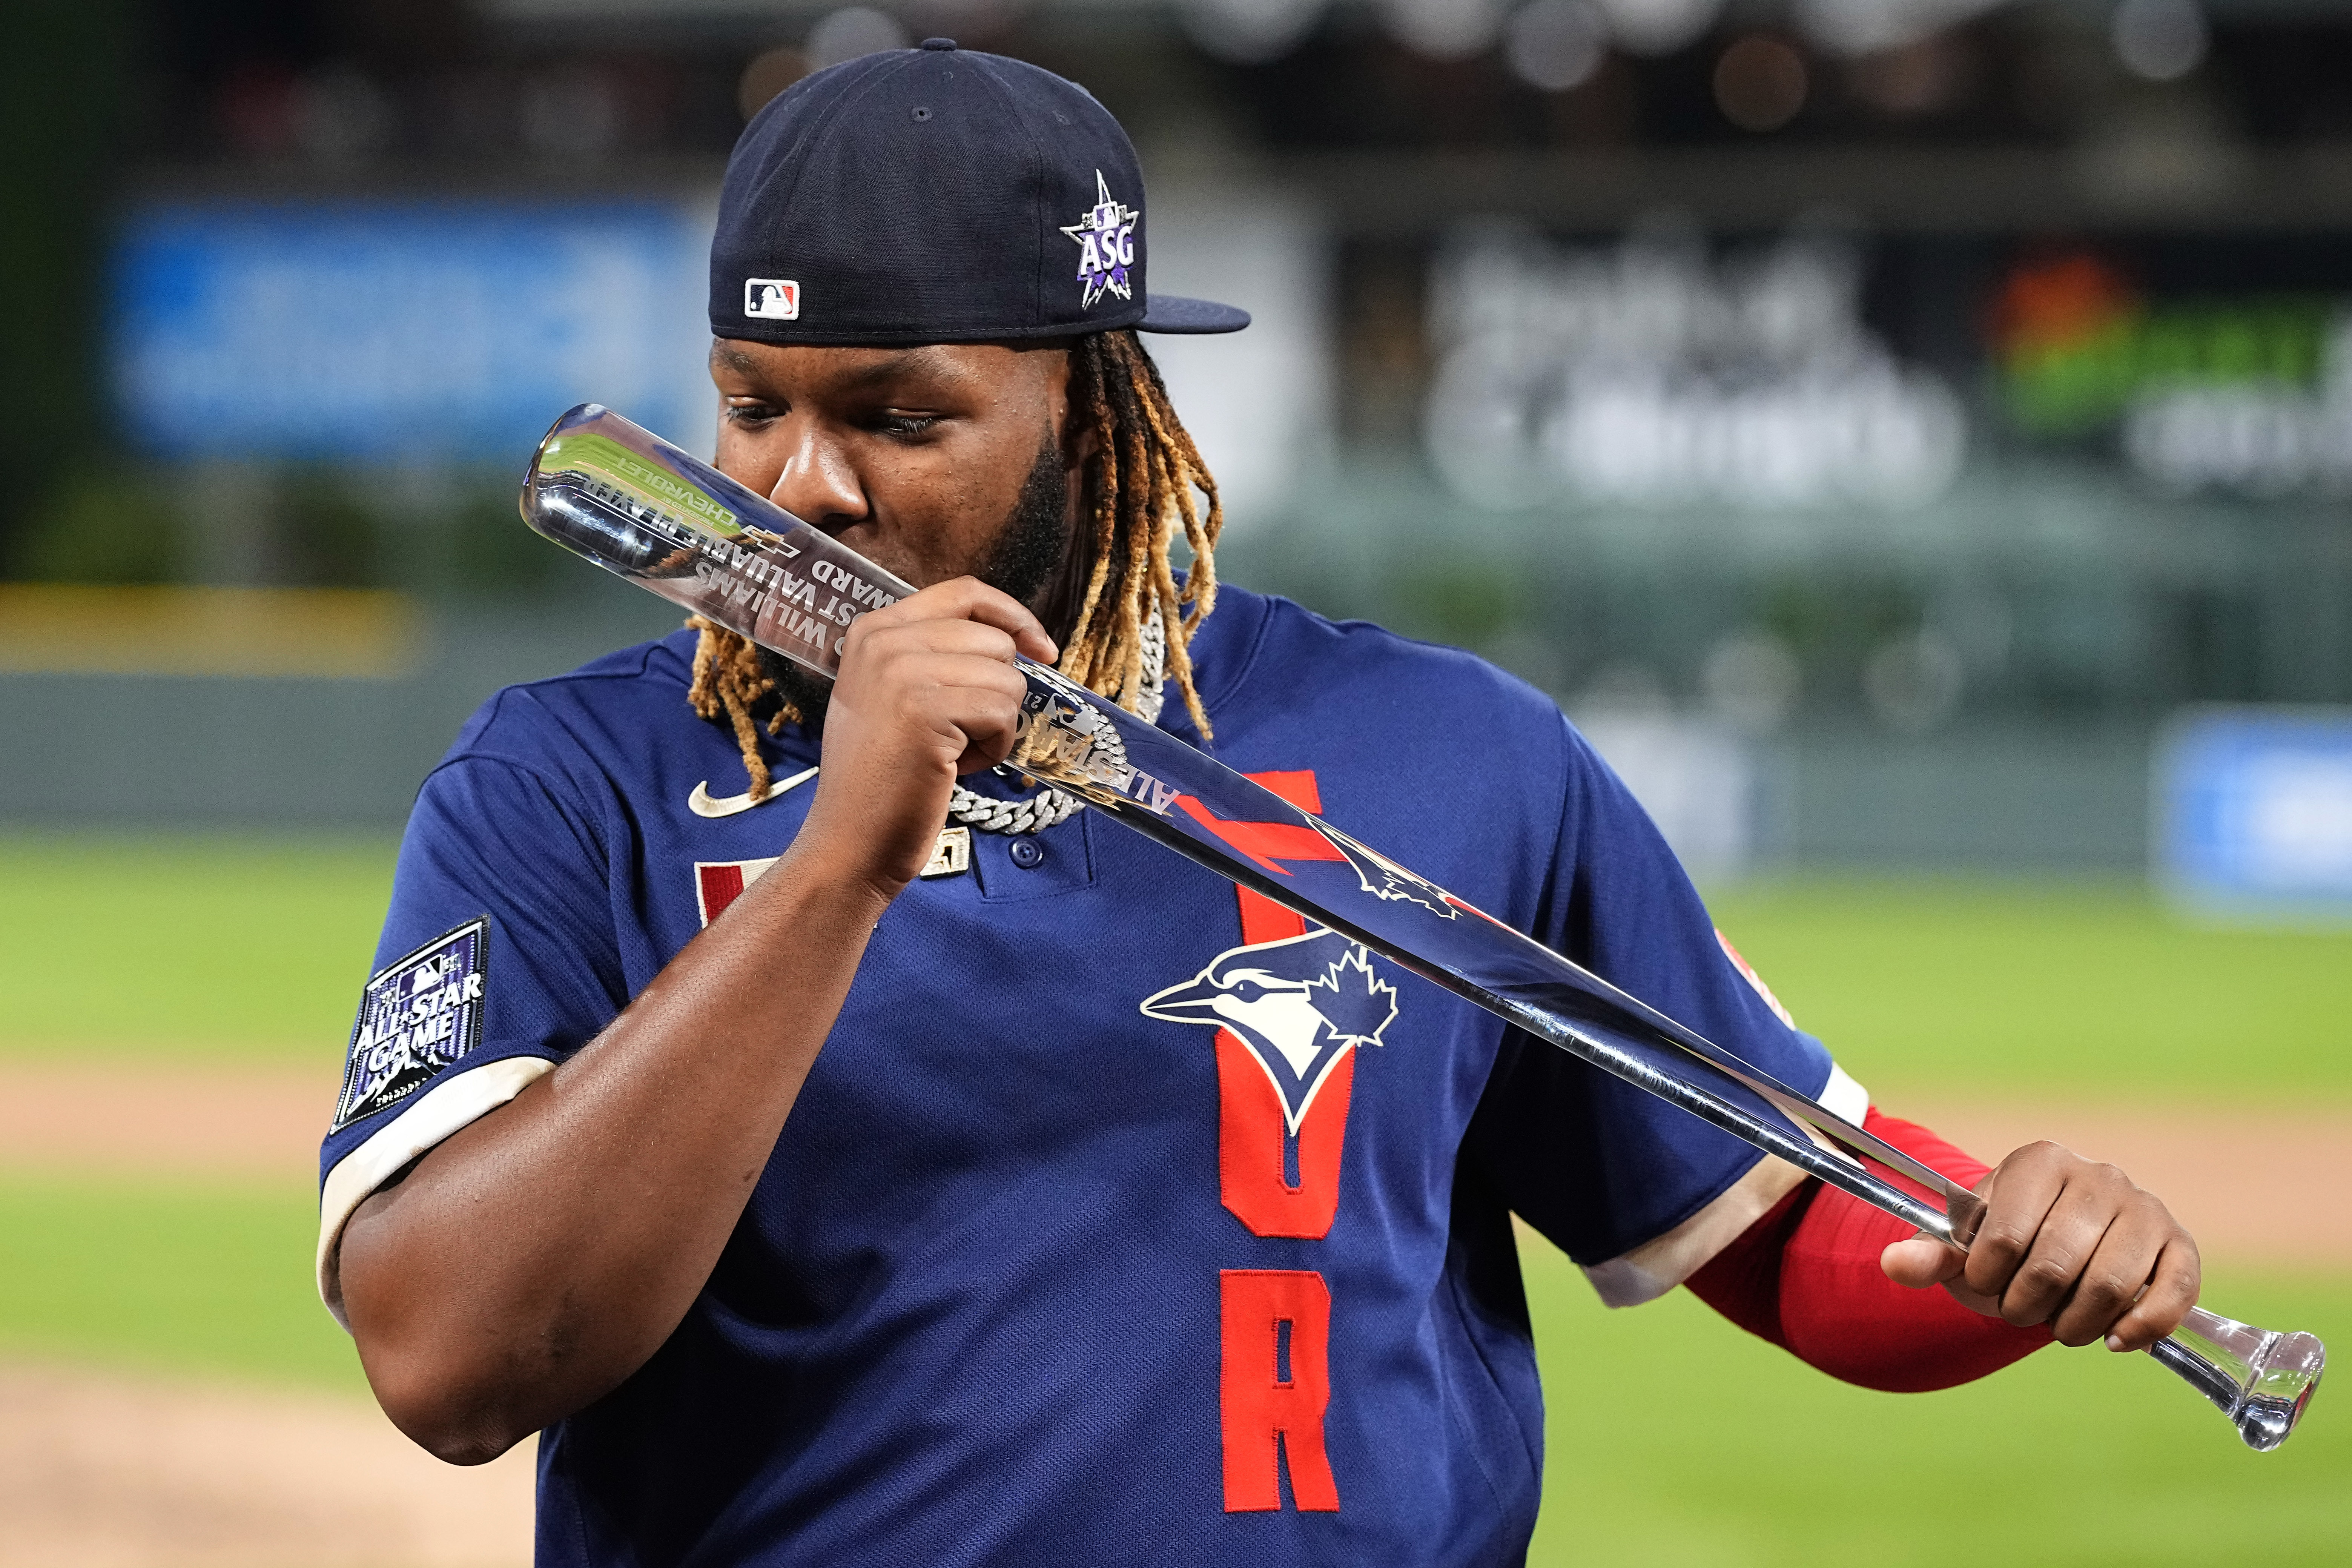 ESPN on X: Vlad Guerrero Jr. hit his first two home runs of his career in  the same park his dad, Vladimir Guerrero, won the 2007 Home Run Derby.   / X